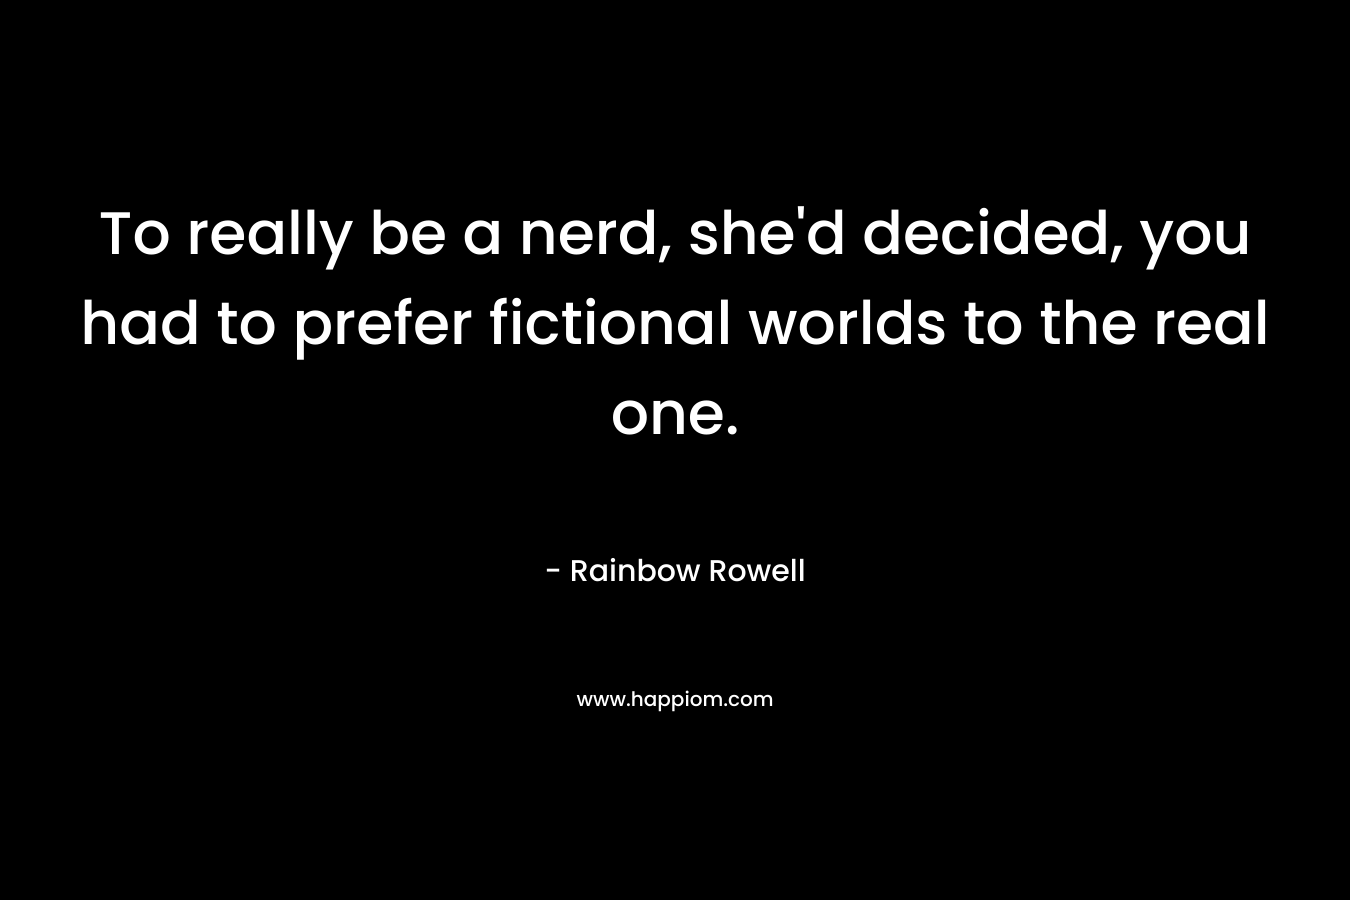 To really be a nerd, she'd decided, you had to prefer fictional worlds to the real one.